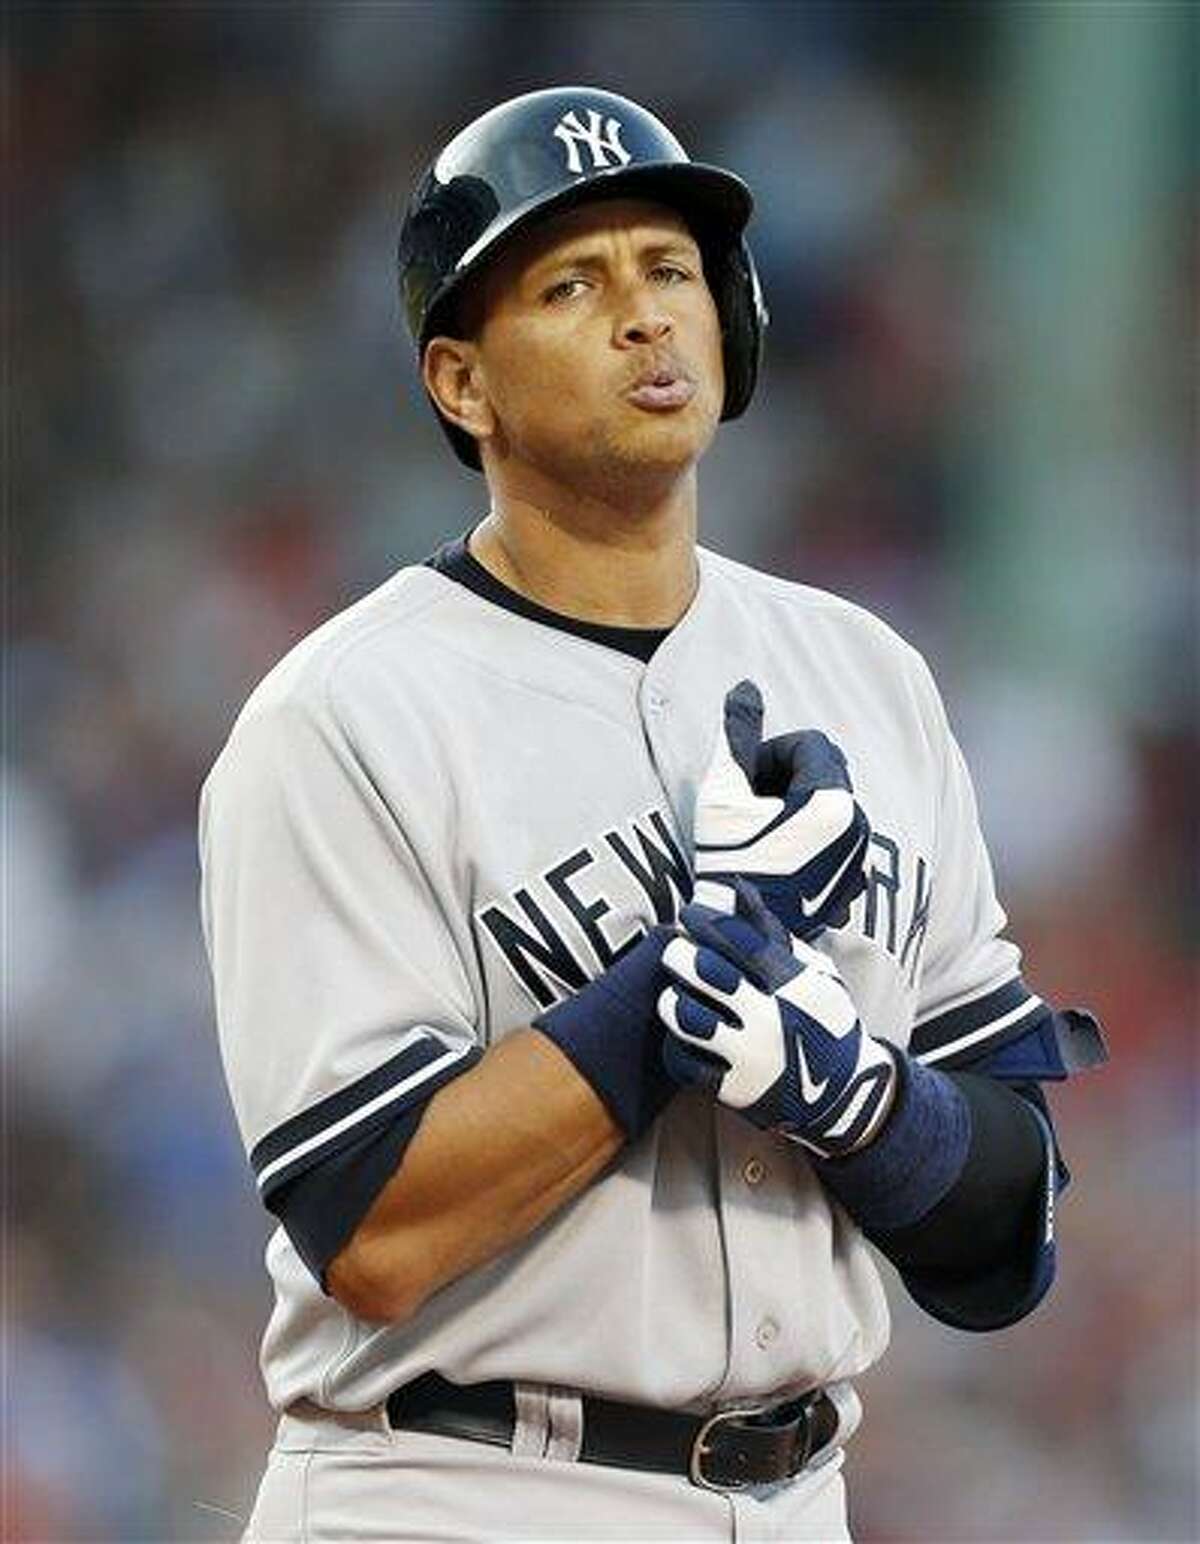 New York Yankees' Alex Rodriguez reacts after flying out in the eighth inning of a baseball game against the Boston Red Sox in Boston, Saturday, Aug. 17, 2013. (AP Photo/Michael Dwyer)